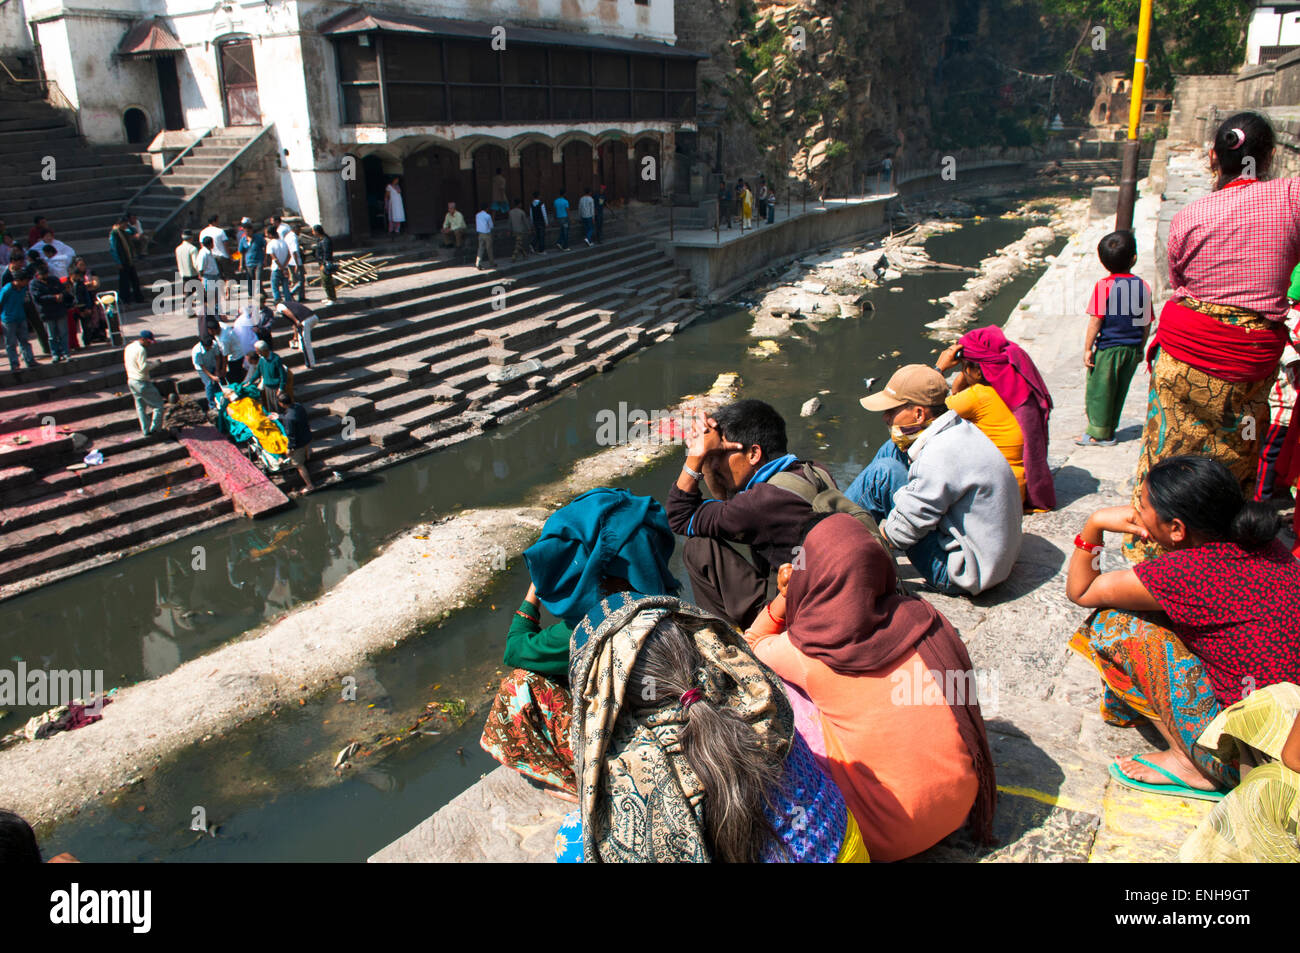 A body headed for cremation in Kathmandu's Pashupatinath temple. Stock Photo